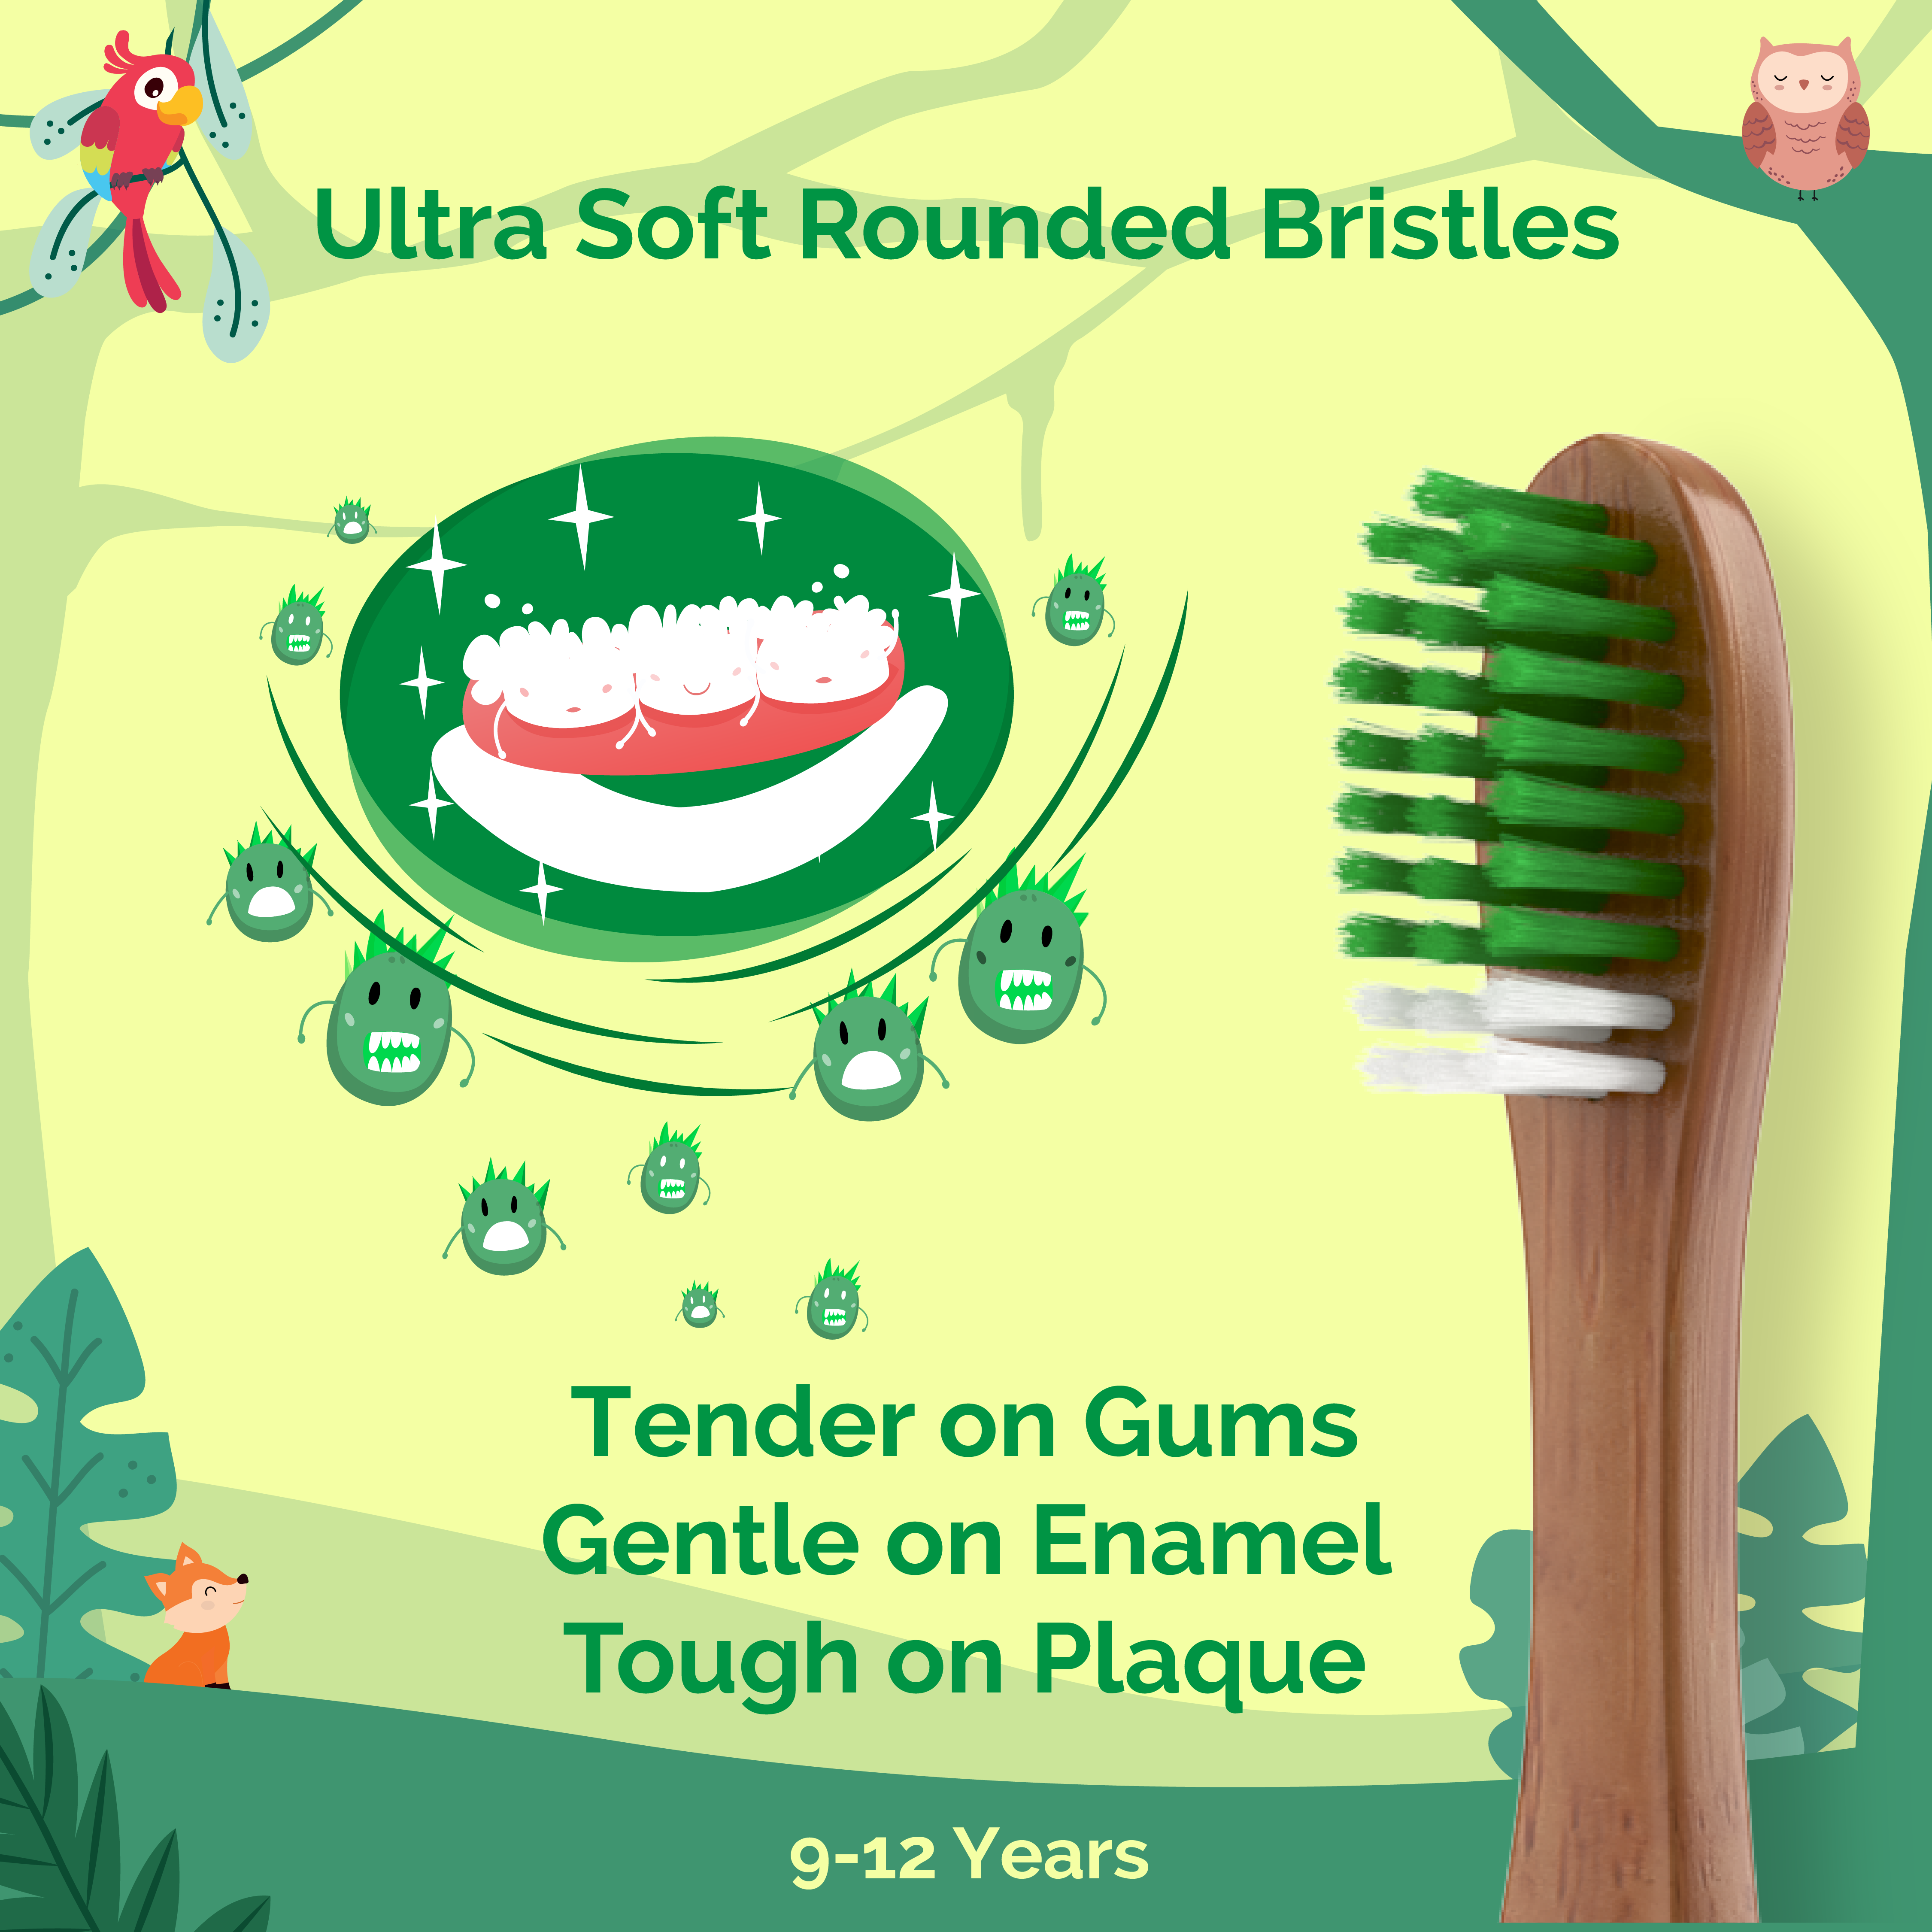 Product: Teeth-a-bit Neem Toothbrush Kids (9-12 Years) Slim Handle with Gum Sensitive Soft Bristles Pack of 2 (Forest Green)